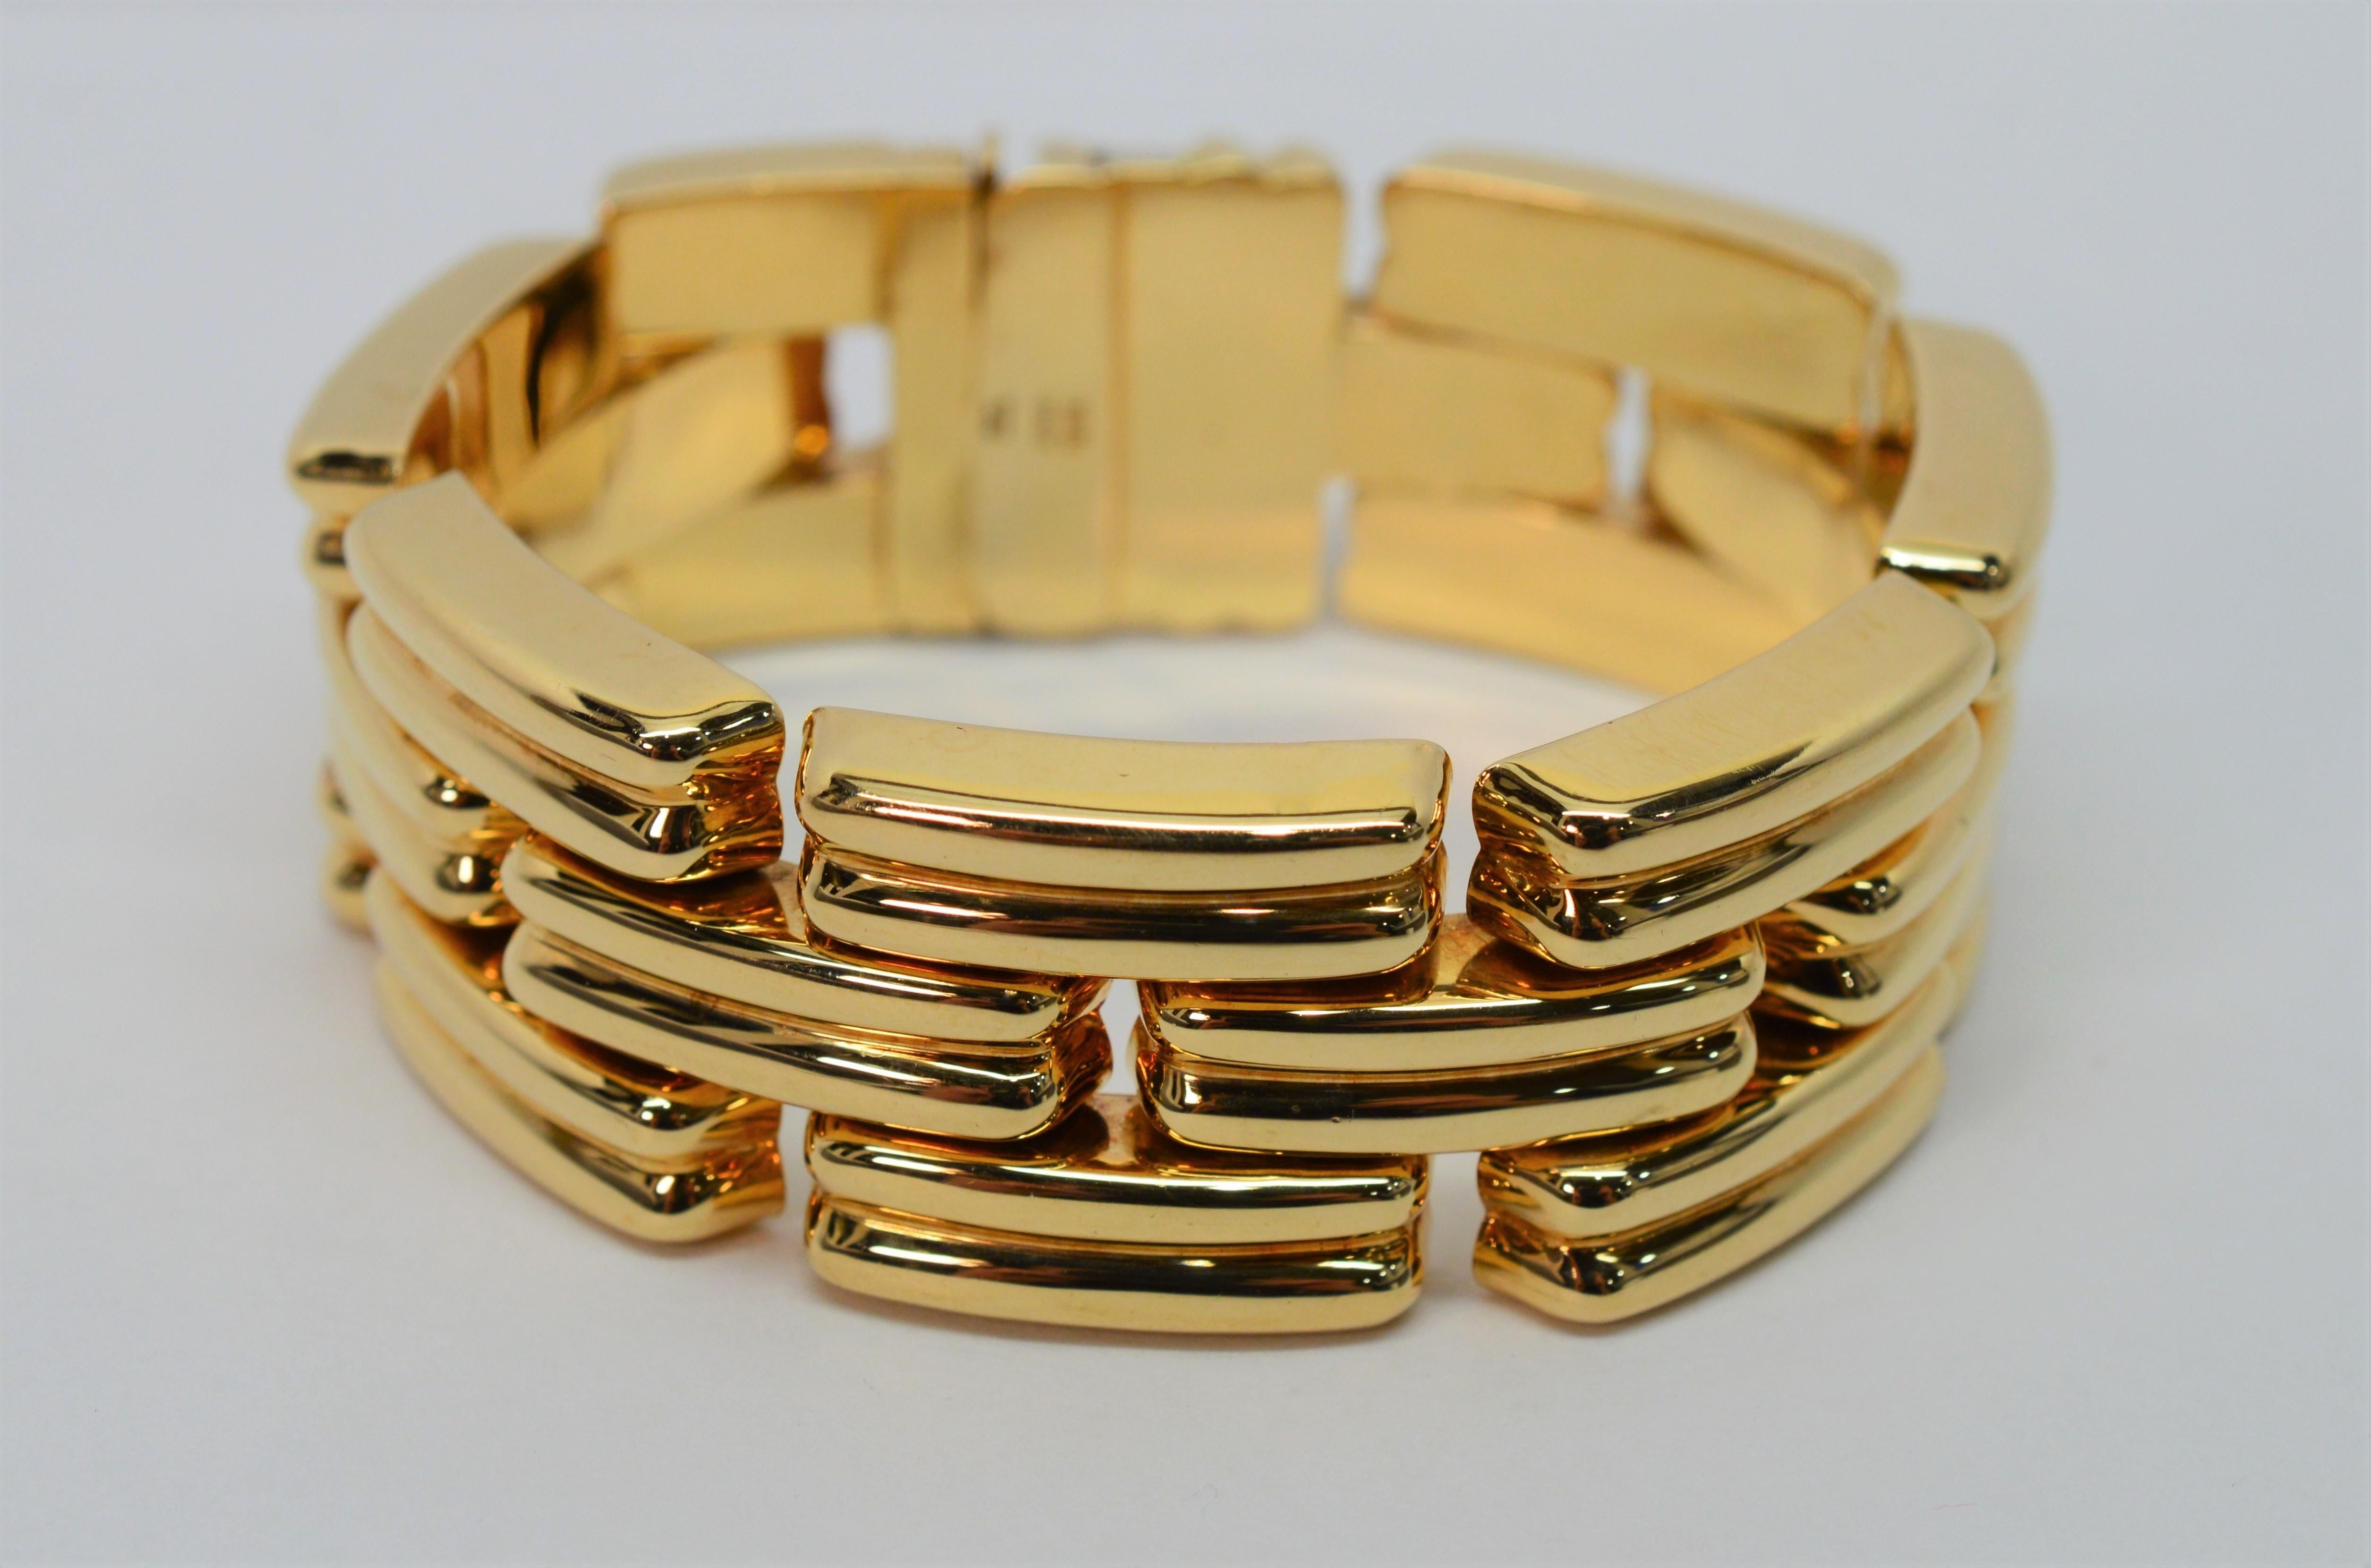 Italian Made Retro Style Yellow Gold Link Bracelet For Sale 1